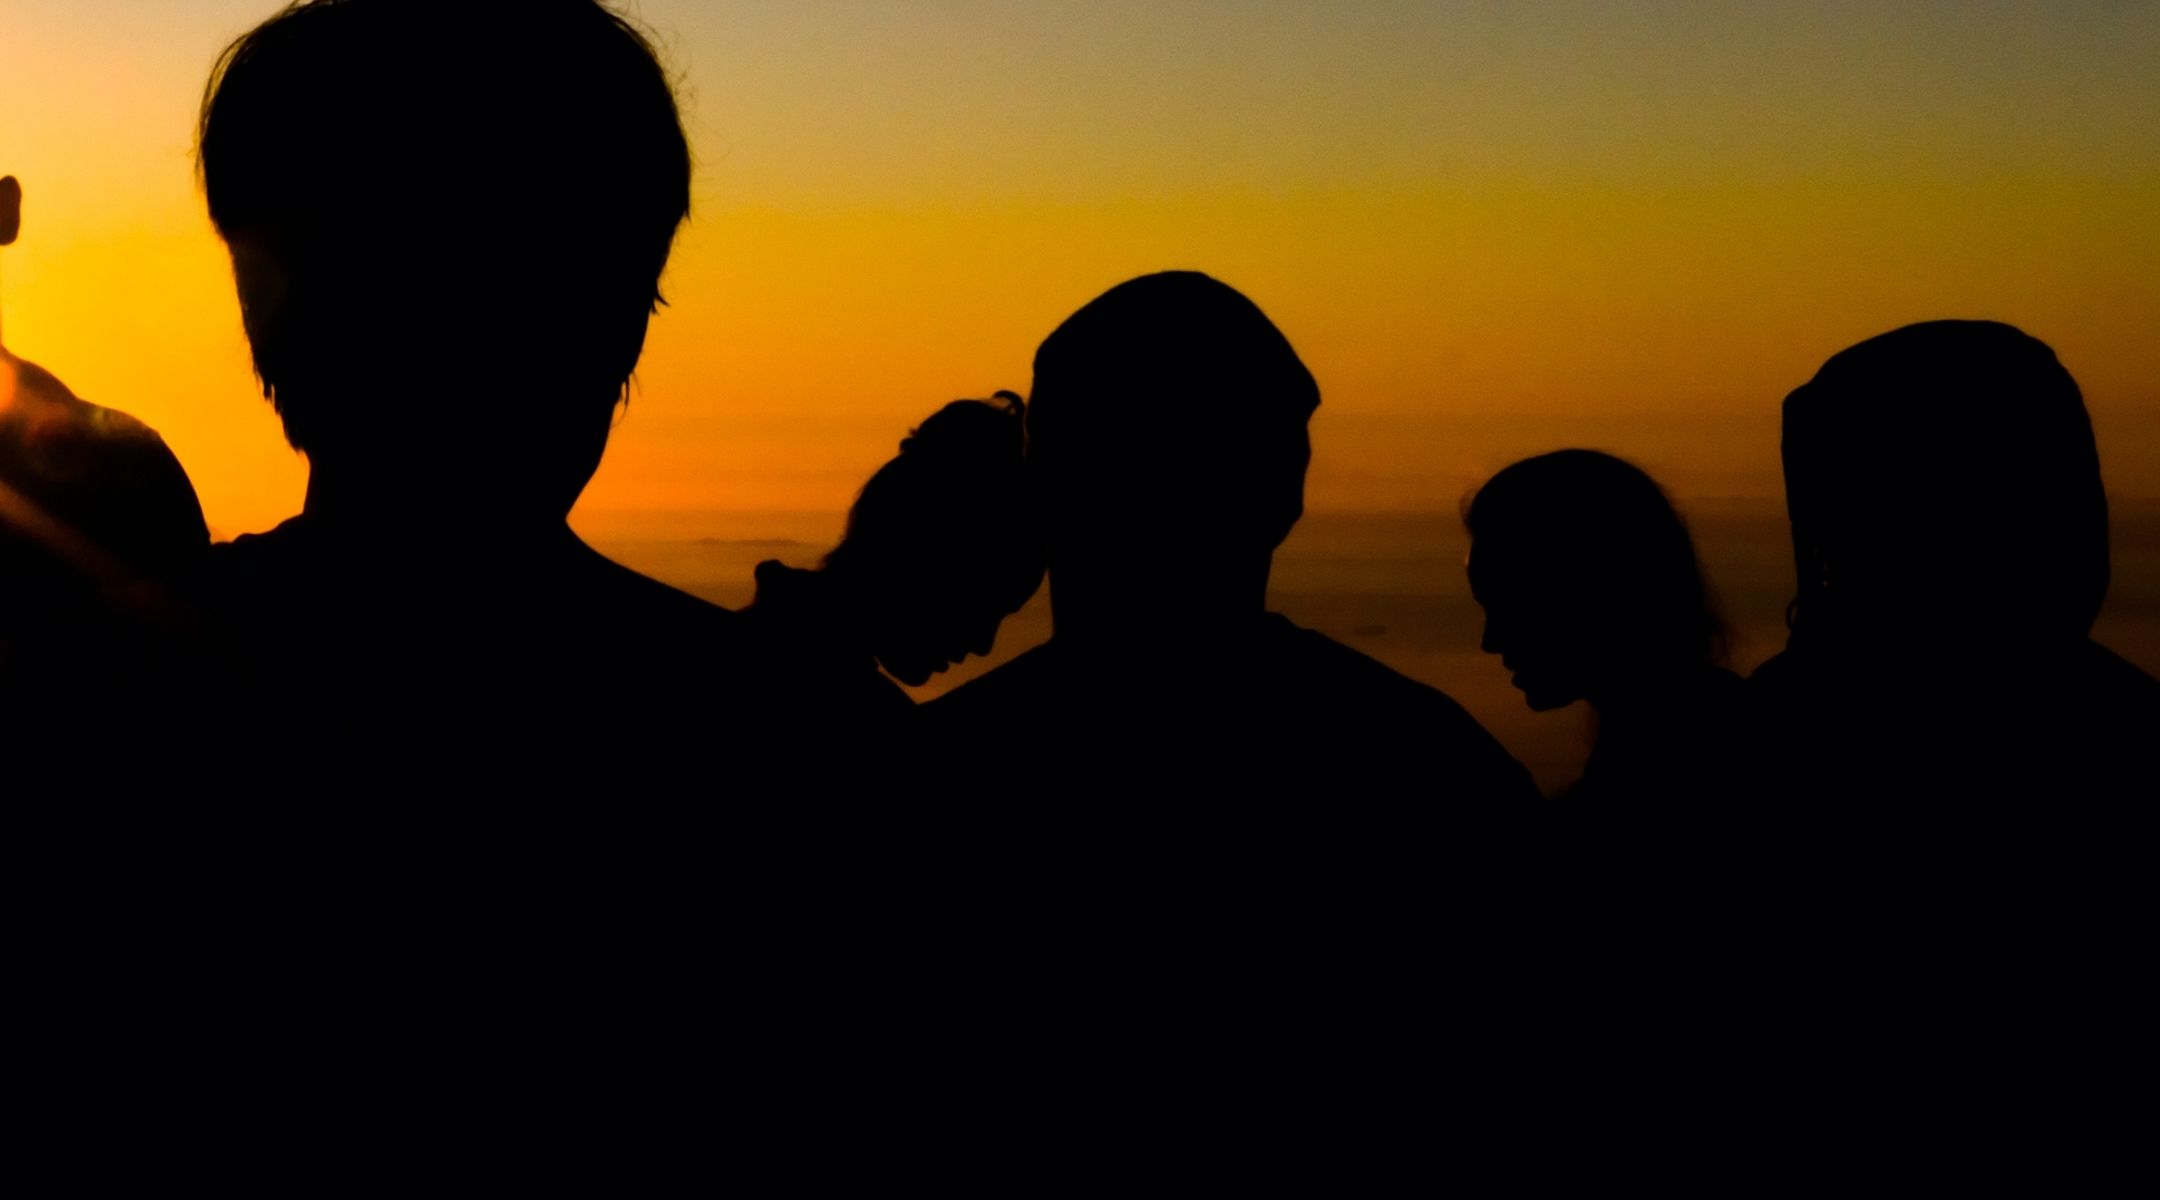 Silhouette of people against a sunset - Who is affected by Diastasis Recti?